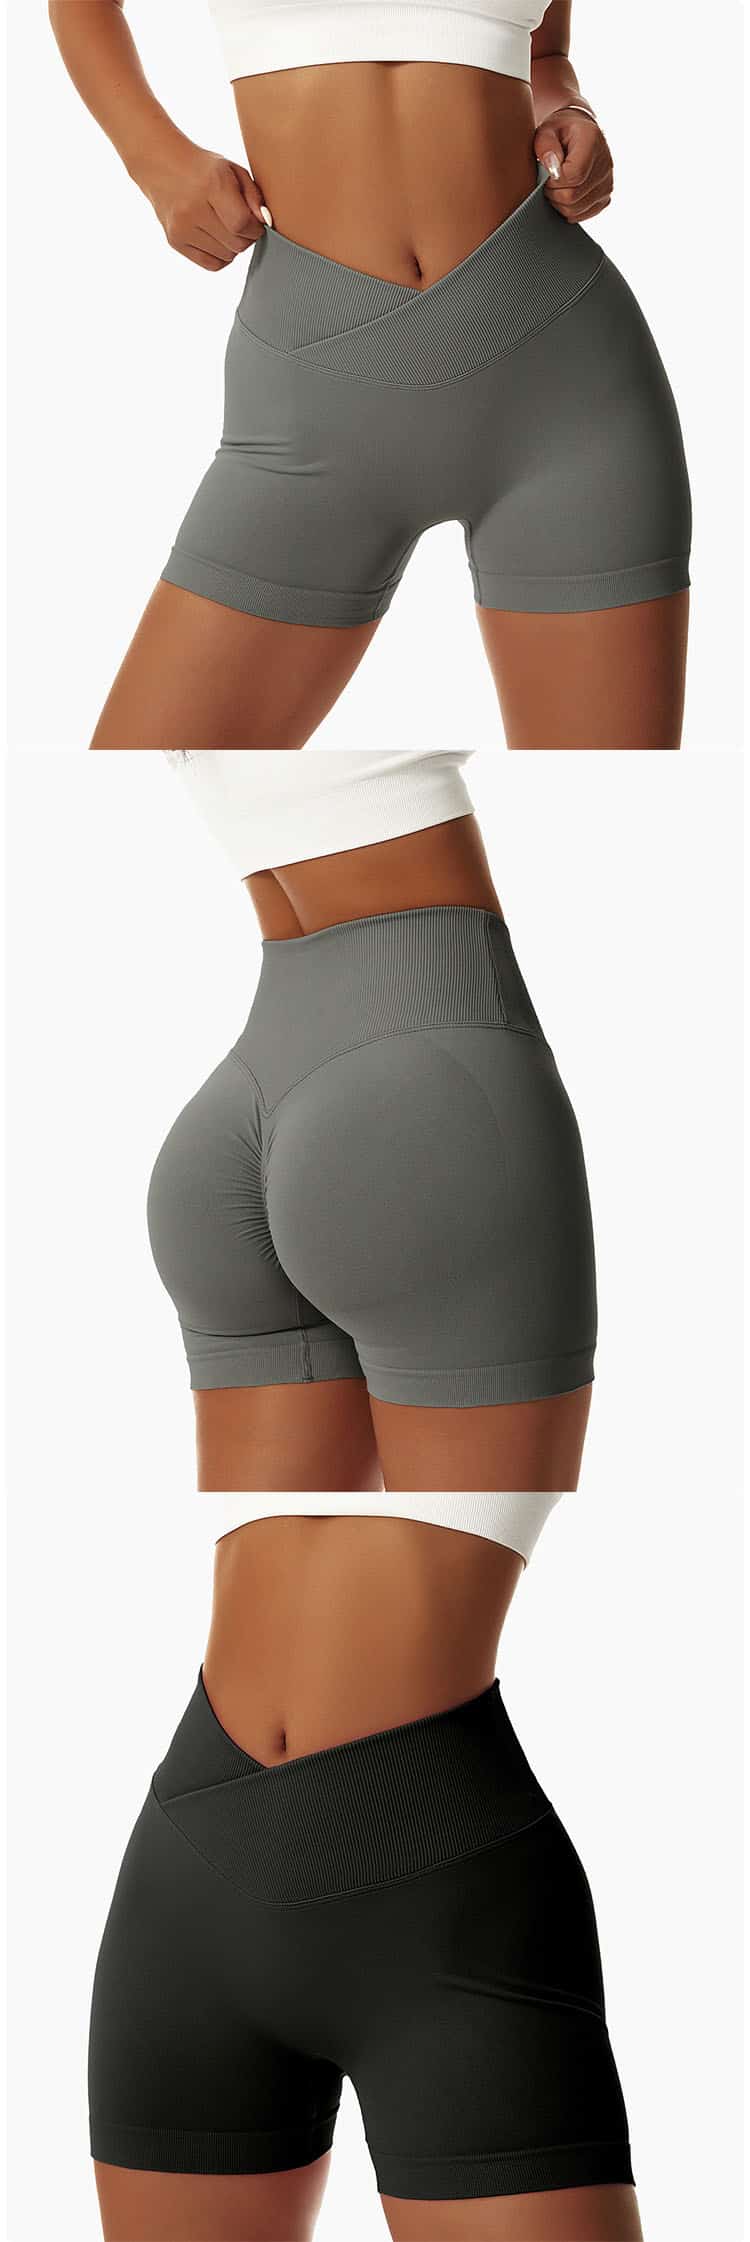 Popular yoga pants with crossing the waist head can better gather the excess fat around the waist